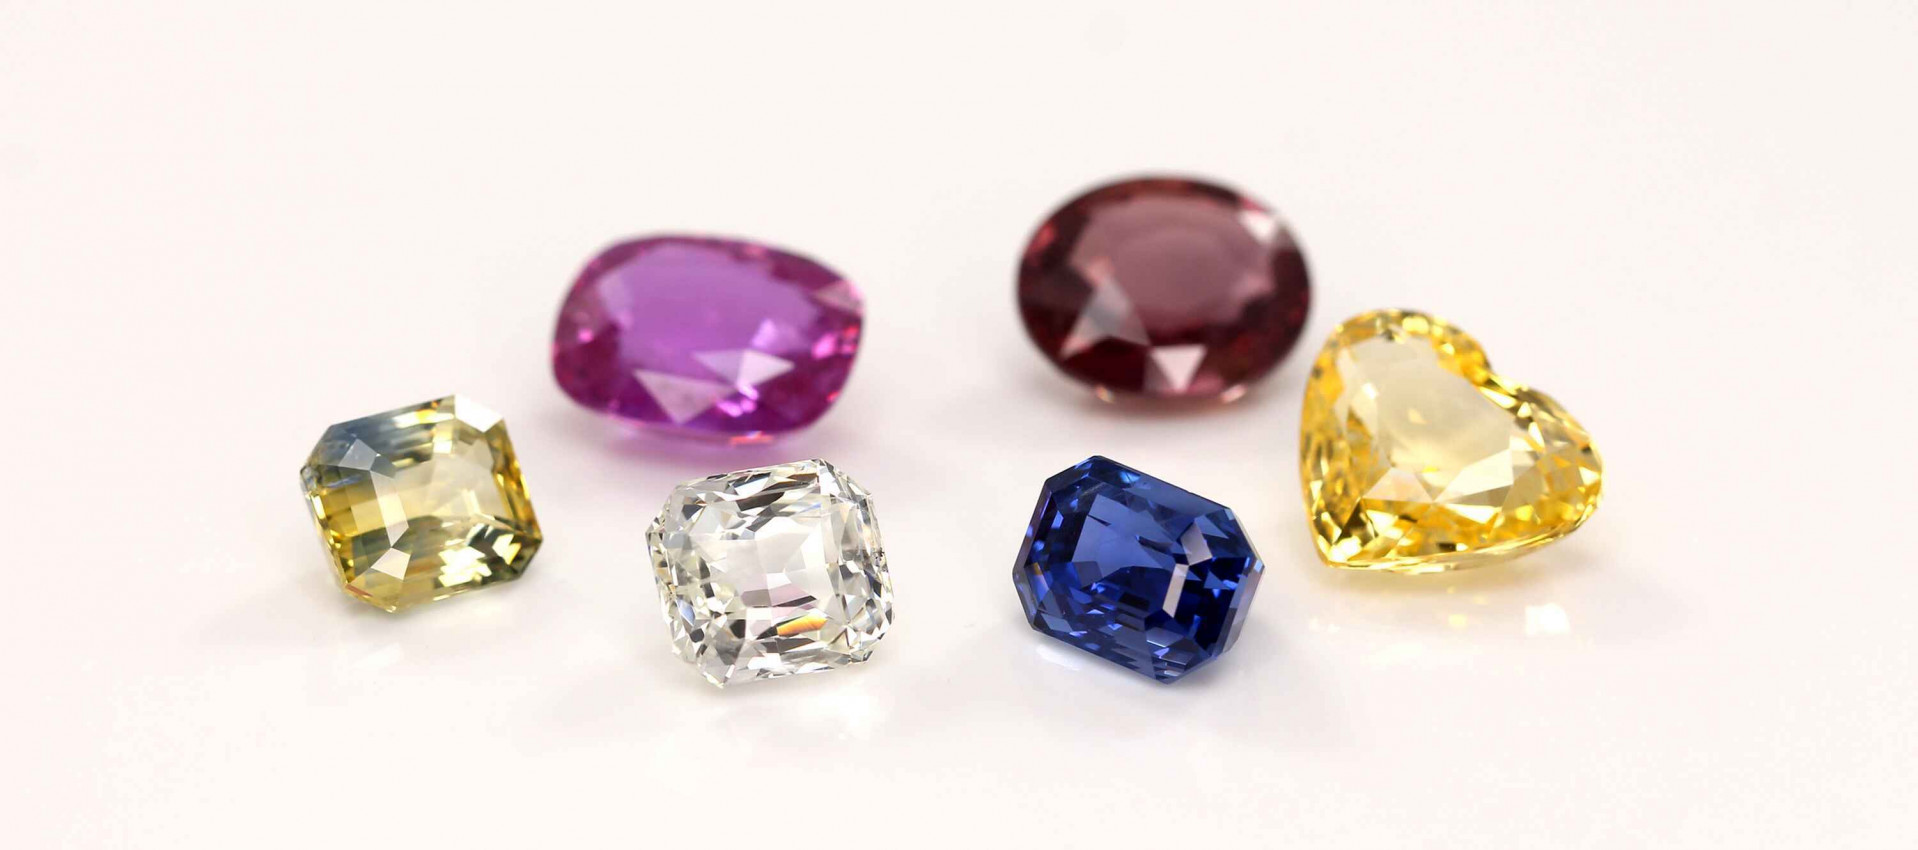 How to Choose a Quality Sapphire